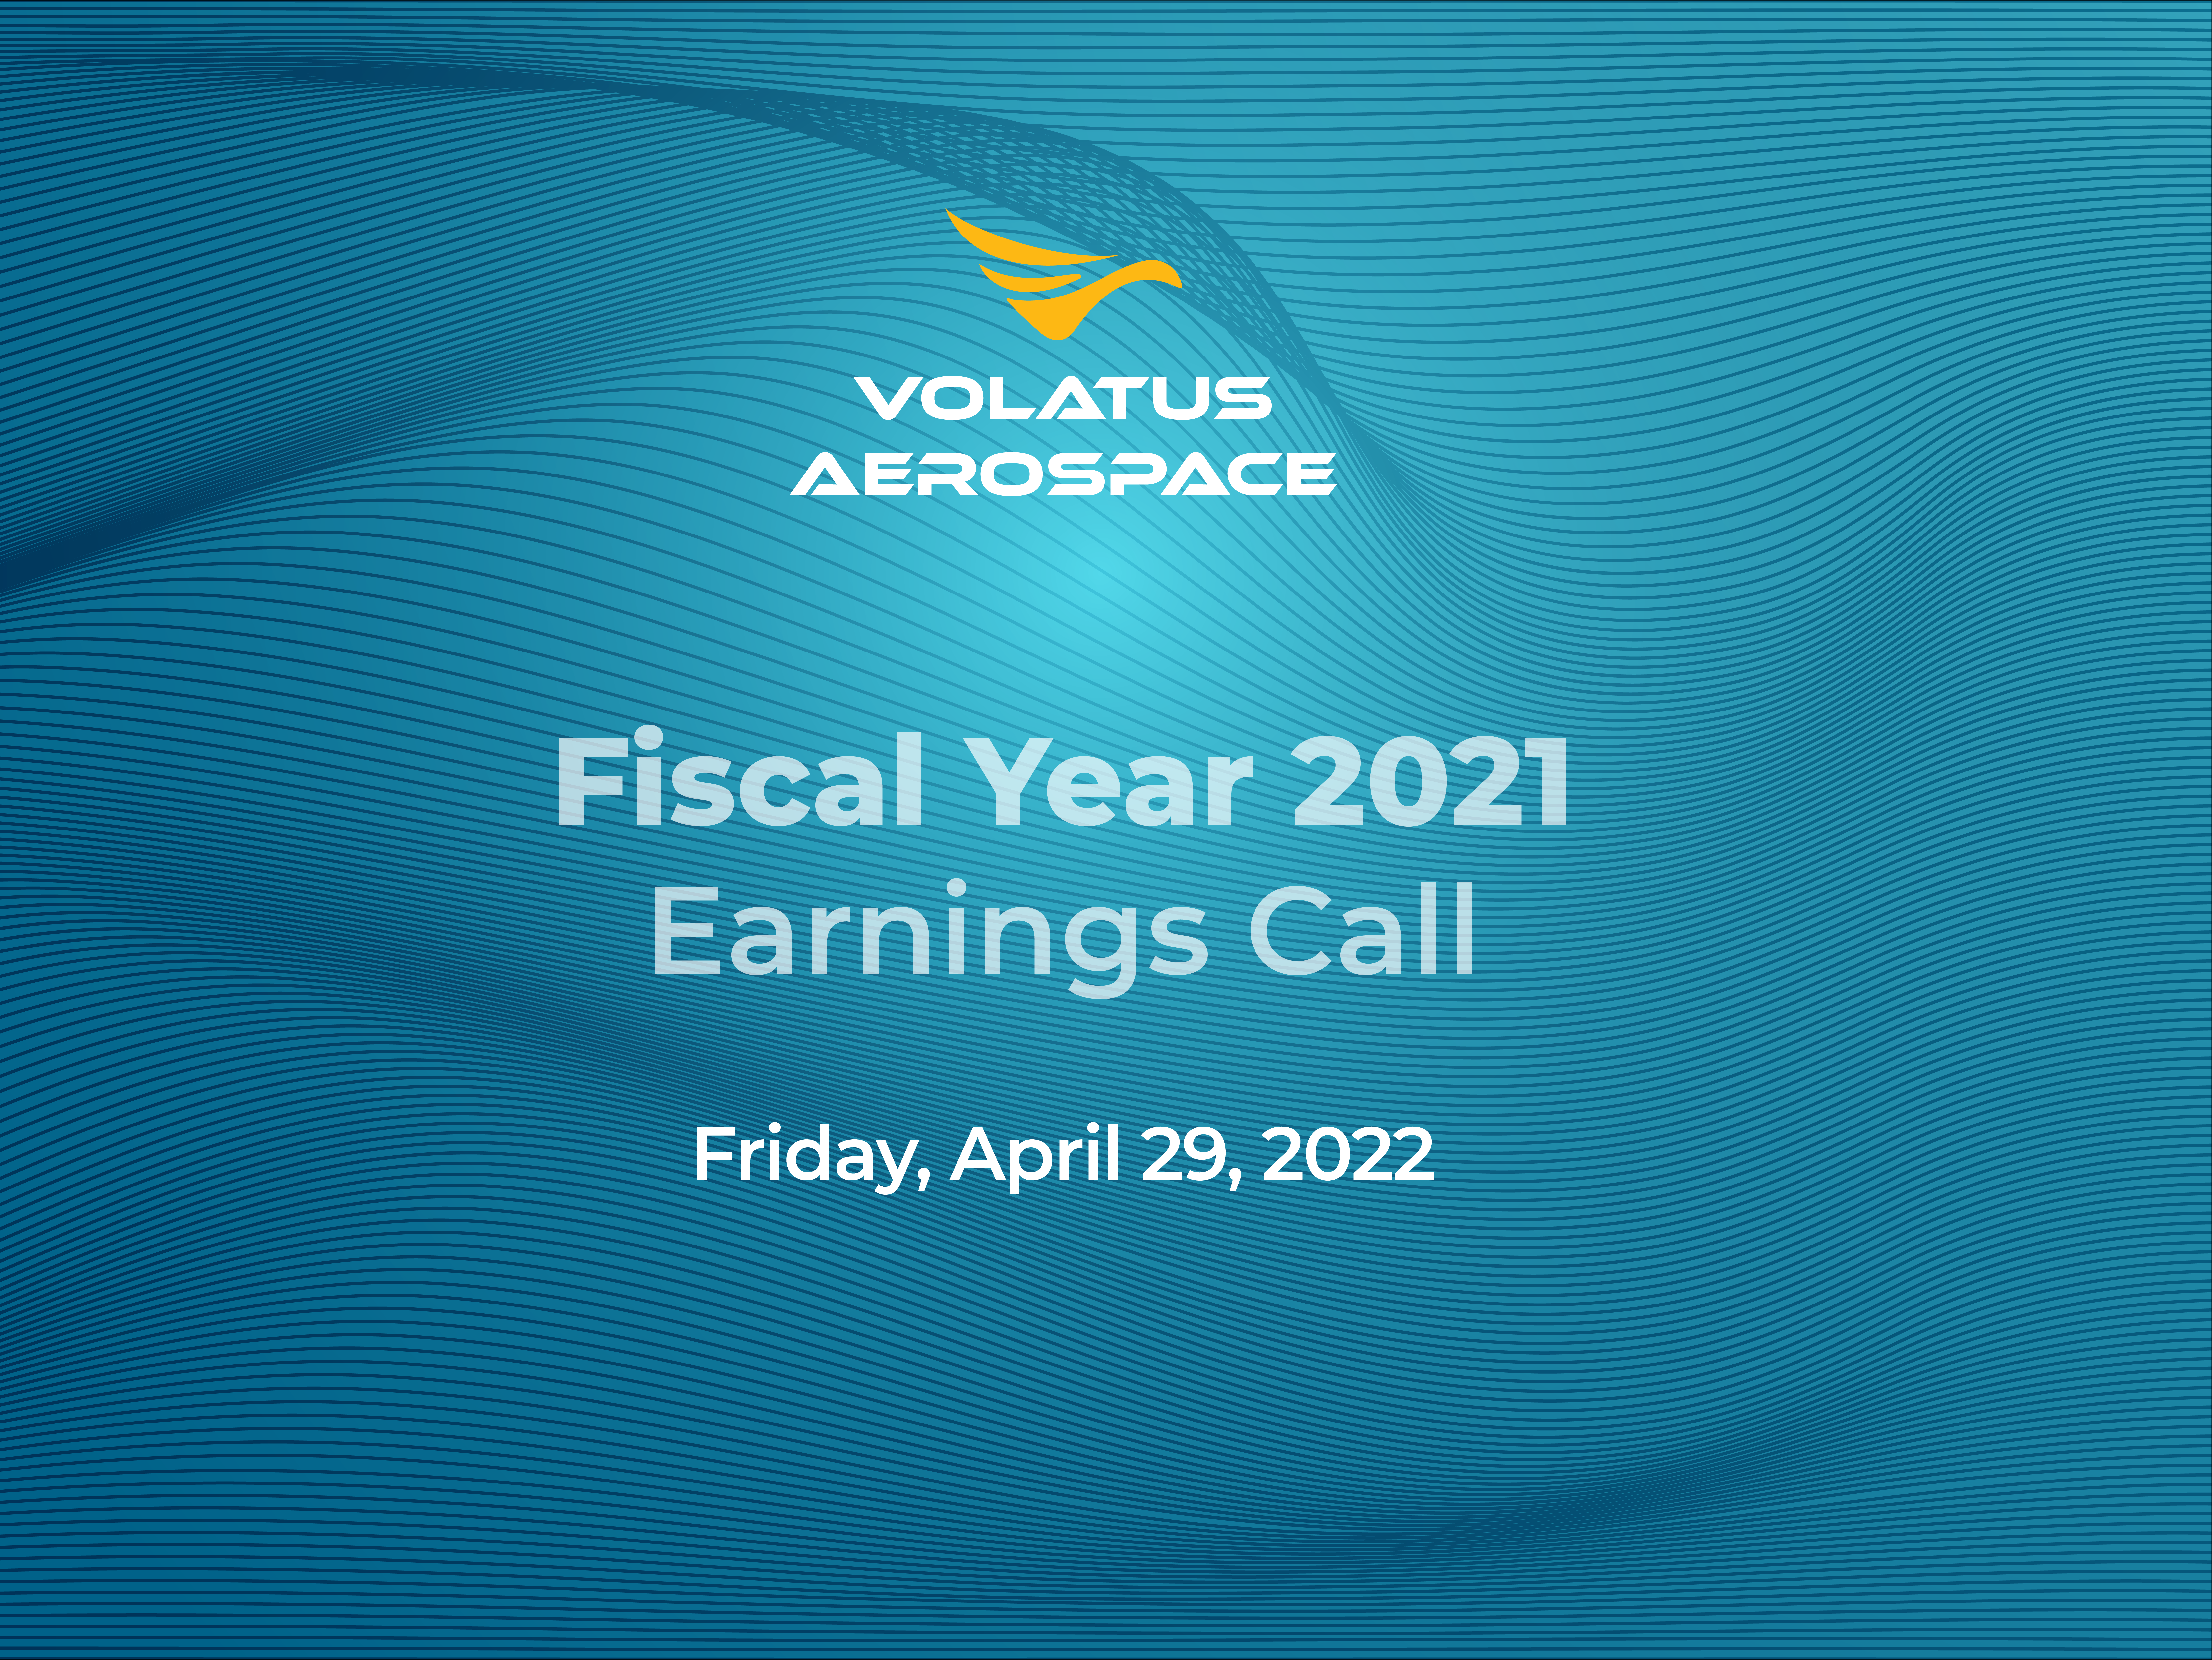 Volatus Aerospace to Announce its Q4 Earnings and Fiscal Year 2021 Financial Results on Thursday, April 28, 2022